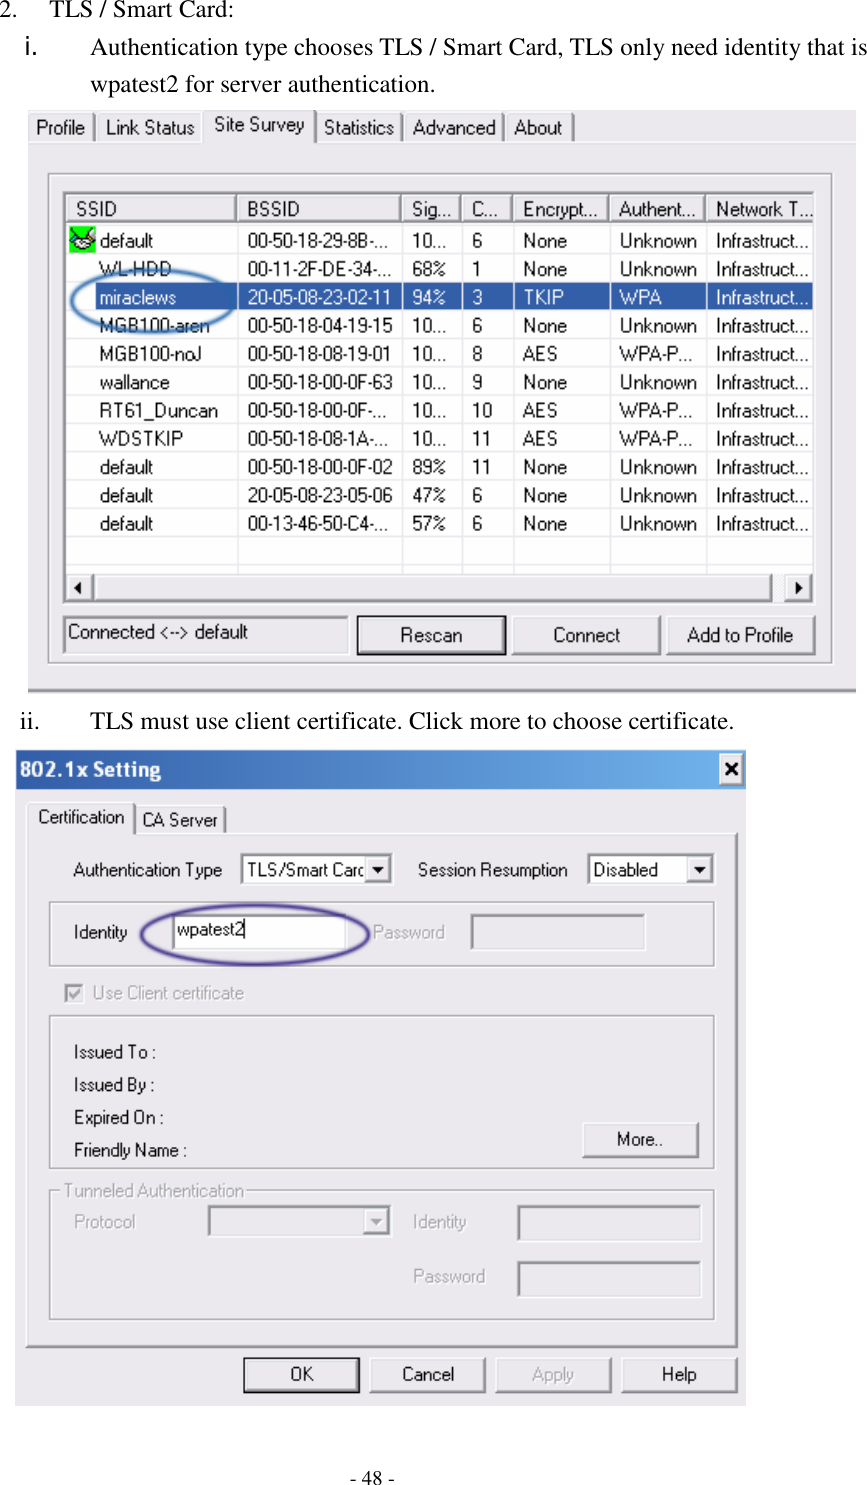    - 48 - 2. TLS / Smart Card: i. Authentication type chooses TLS / Smart Card, TLS only need identity that is wpatest2 for server authentication.  ii. TLS must use client certificate. Click more to choose certificate.  